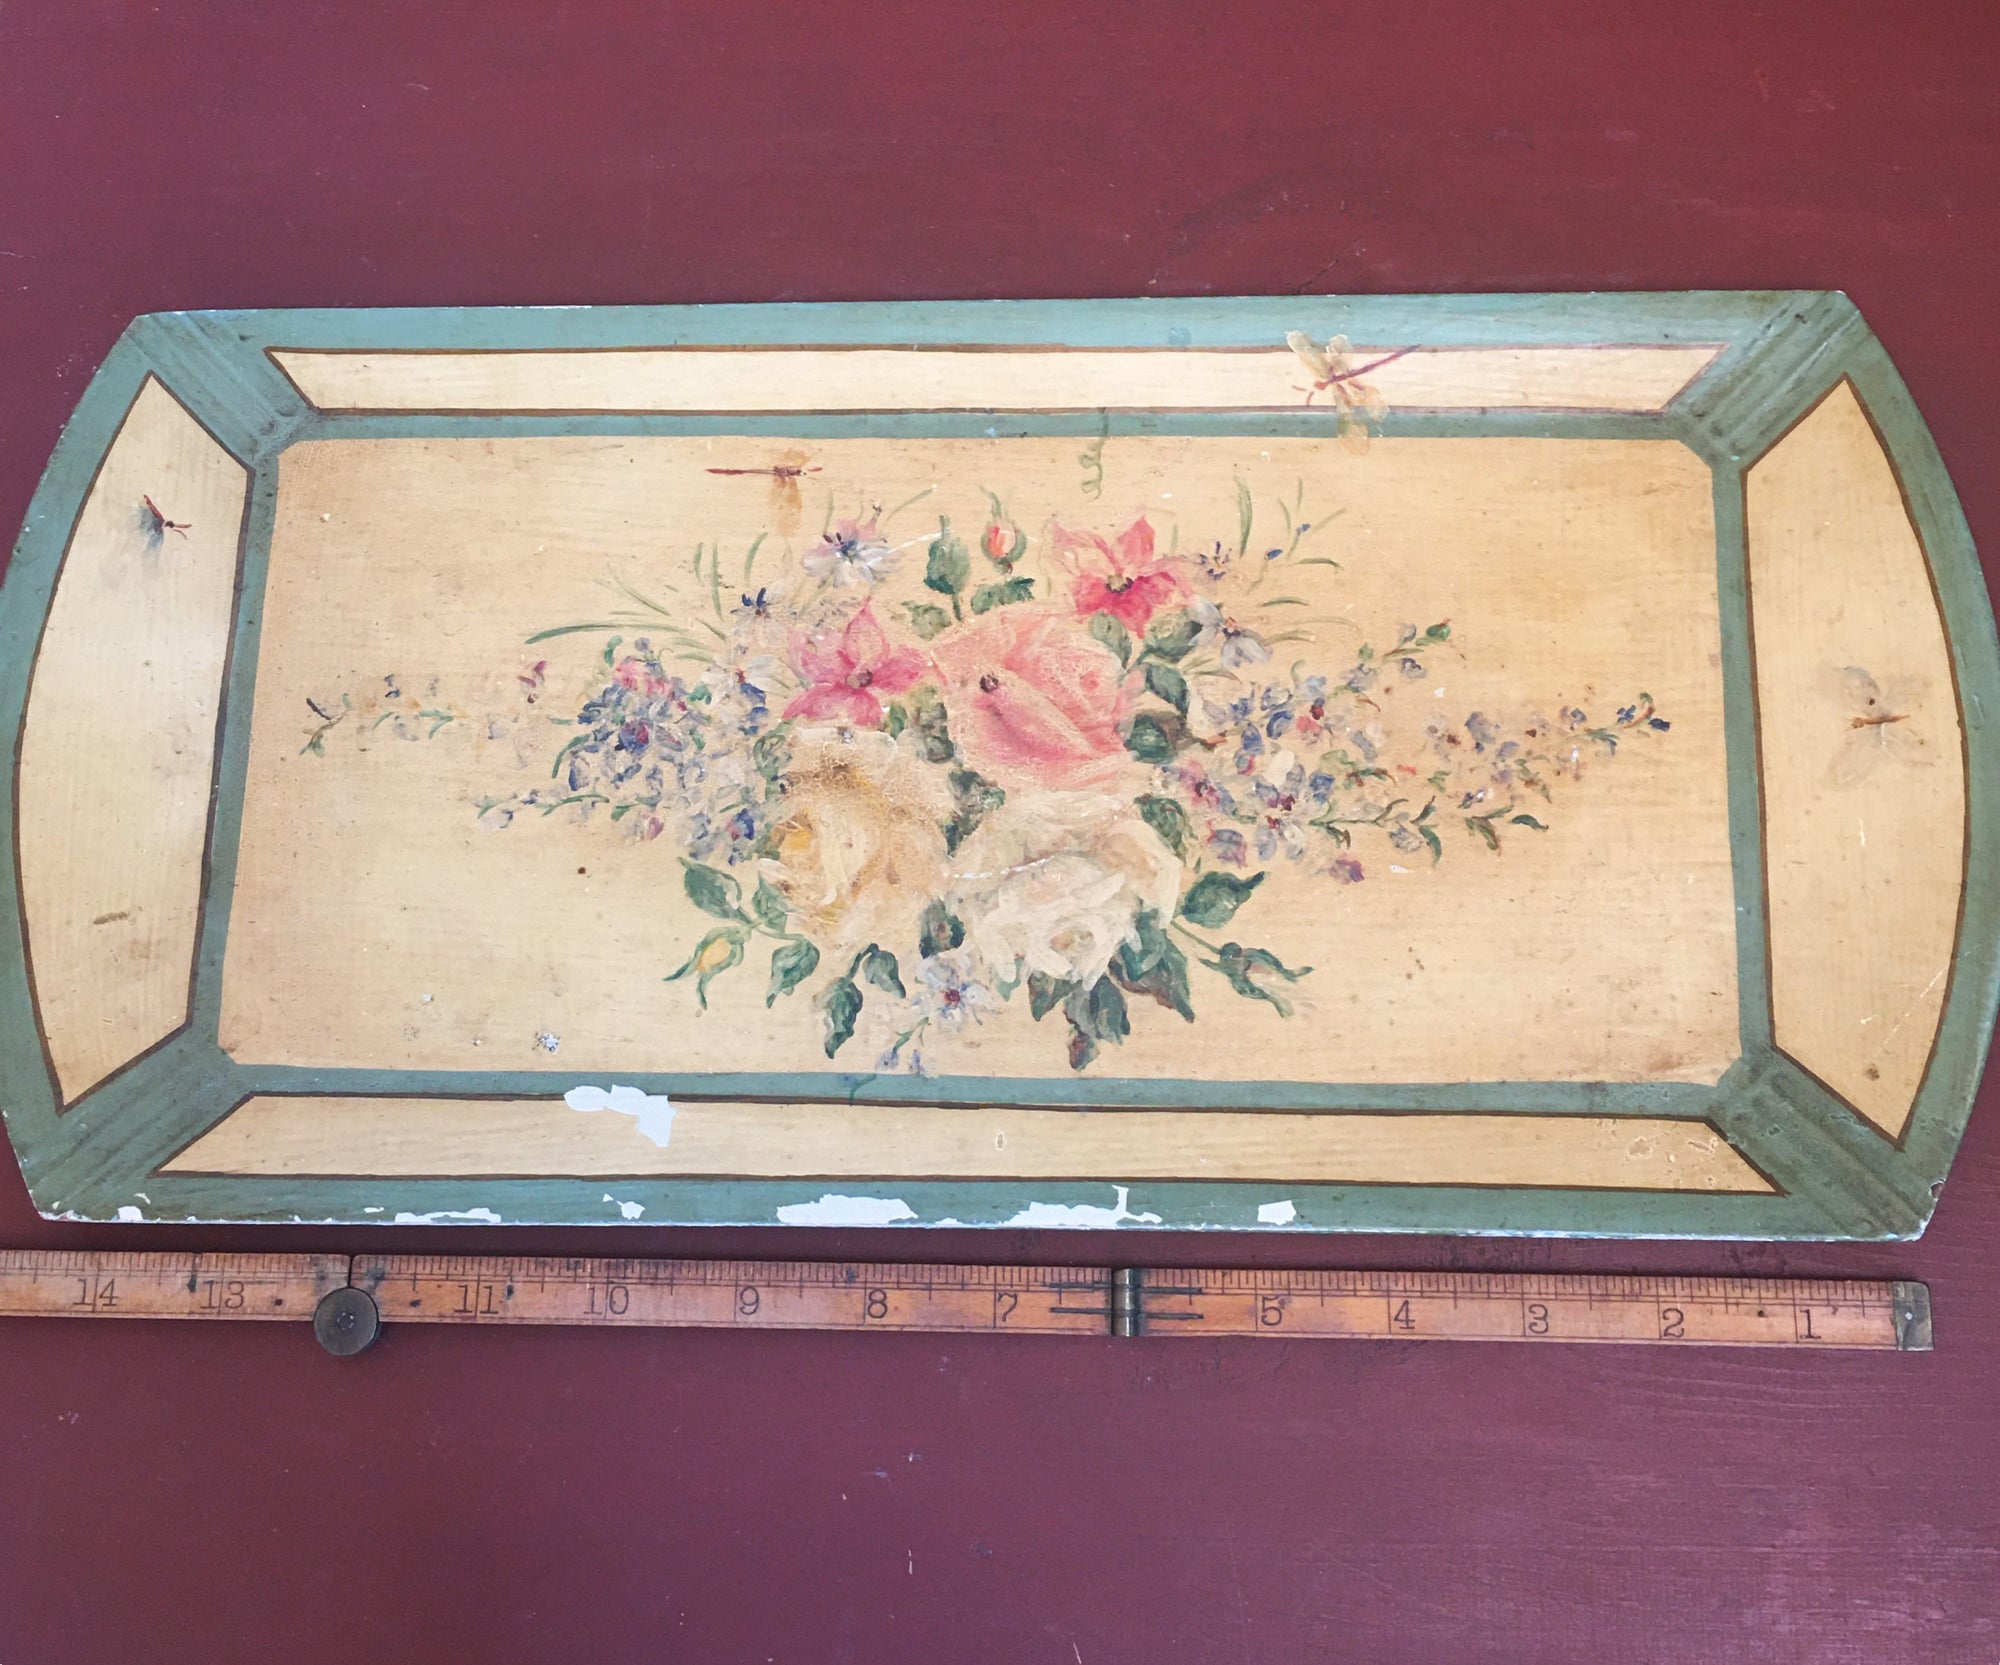 Antique Paper Mache Tray, Hand Painted